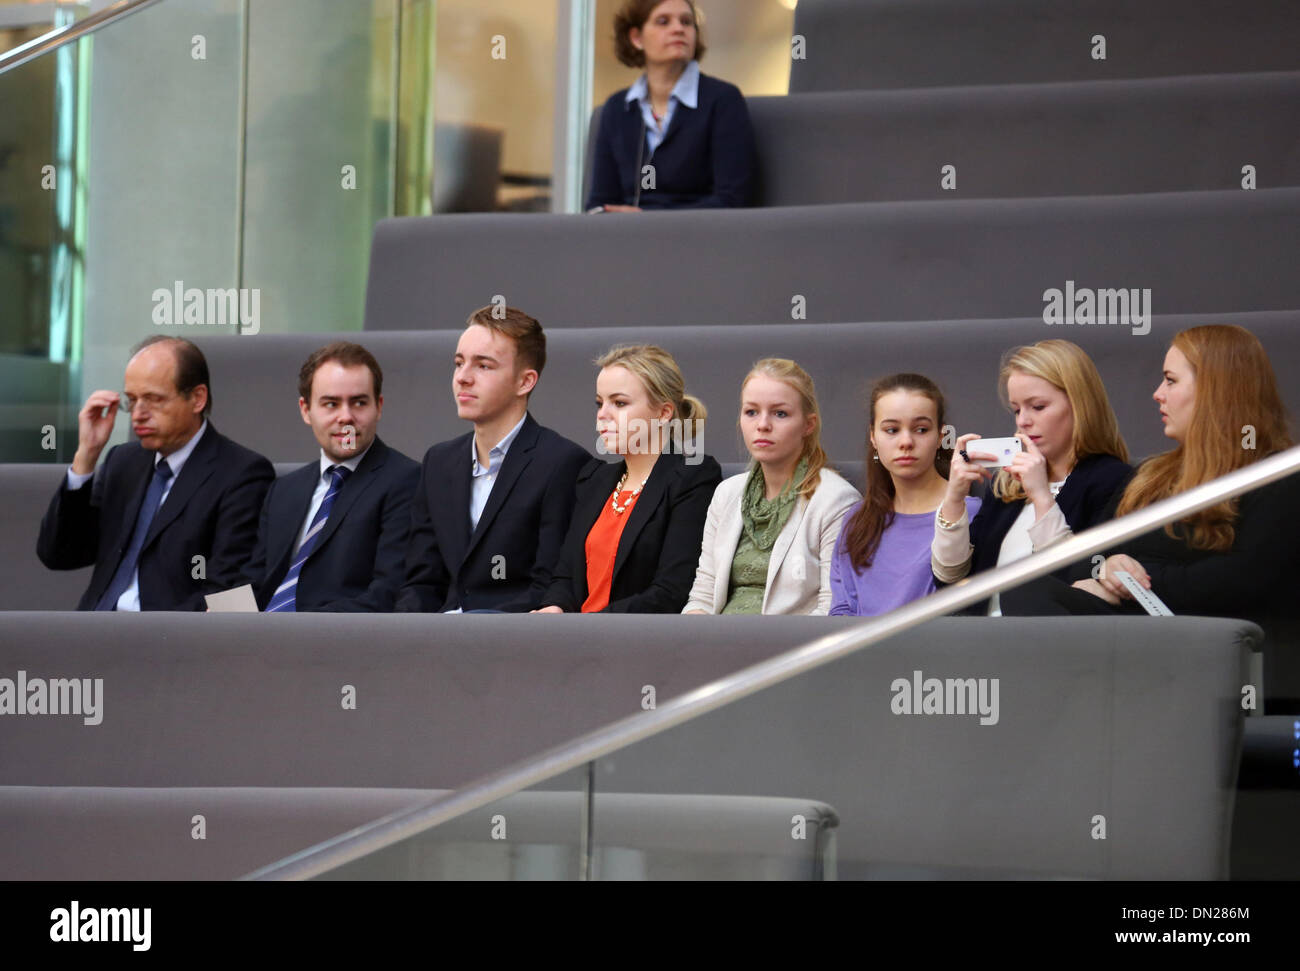 ATTENTION: THE PHOTO CAN ONLY BE USED IN CONNECTION WITH THE CURRENT REPORT ABOUT THE SWEARING IN OF VON DER LEYEN: THE USE OF THE PICTURE IN OTHER CONTEXTS IS NOT PERMITTED DUE TO PRIVACY REASONS. - The family of new German Defence Minister Ursula von der Leyen sits in the stands in the German Bundestag in Berlin, Germany, 17 December 2013. Husband Heiko von der Leyen, sons David and Egmont and daughters Sophie, Victoria, Gracia, Johanna and Donata. The election of the German Chancellor and the swearing in the new government will take place here. Photo: Hannibal/dpa Stock Photo